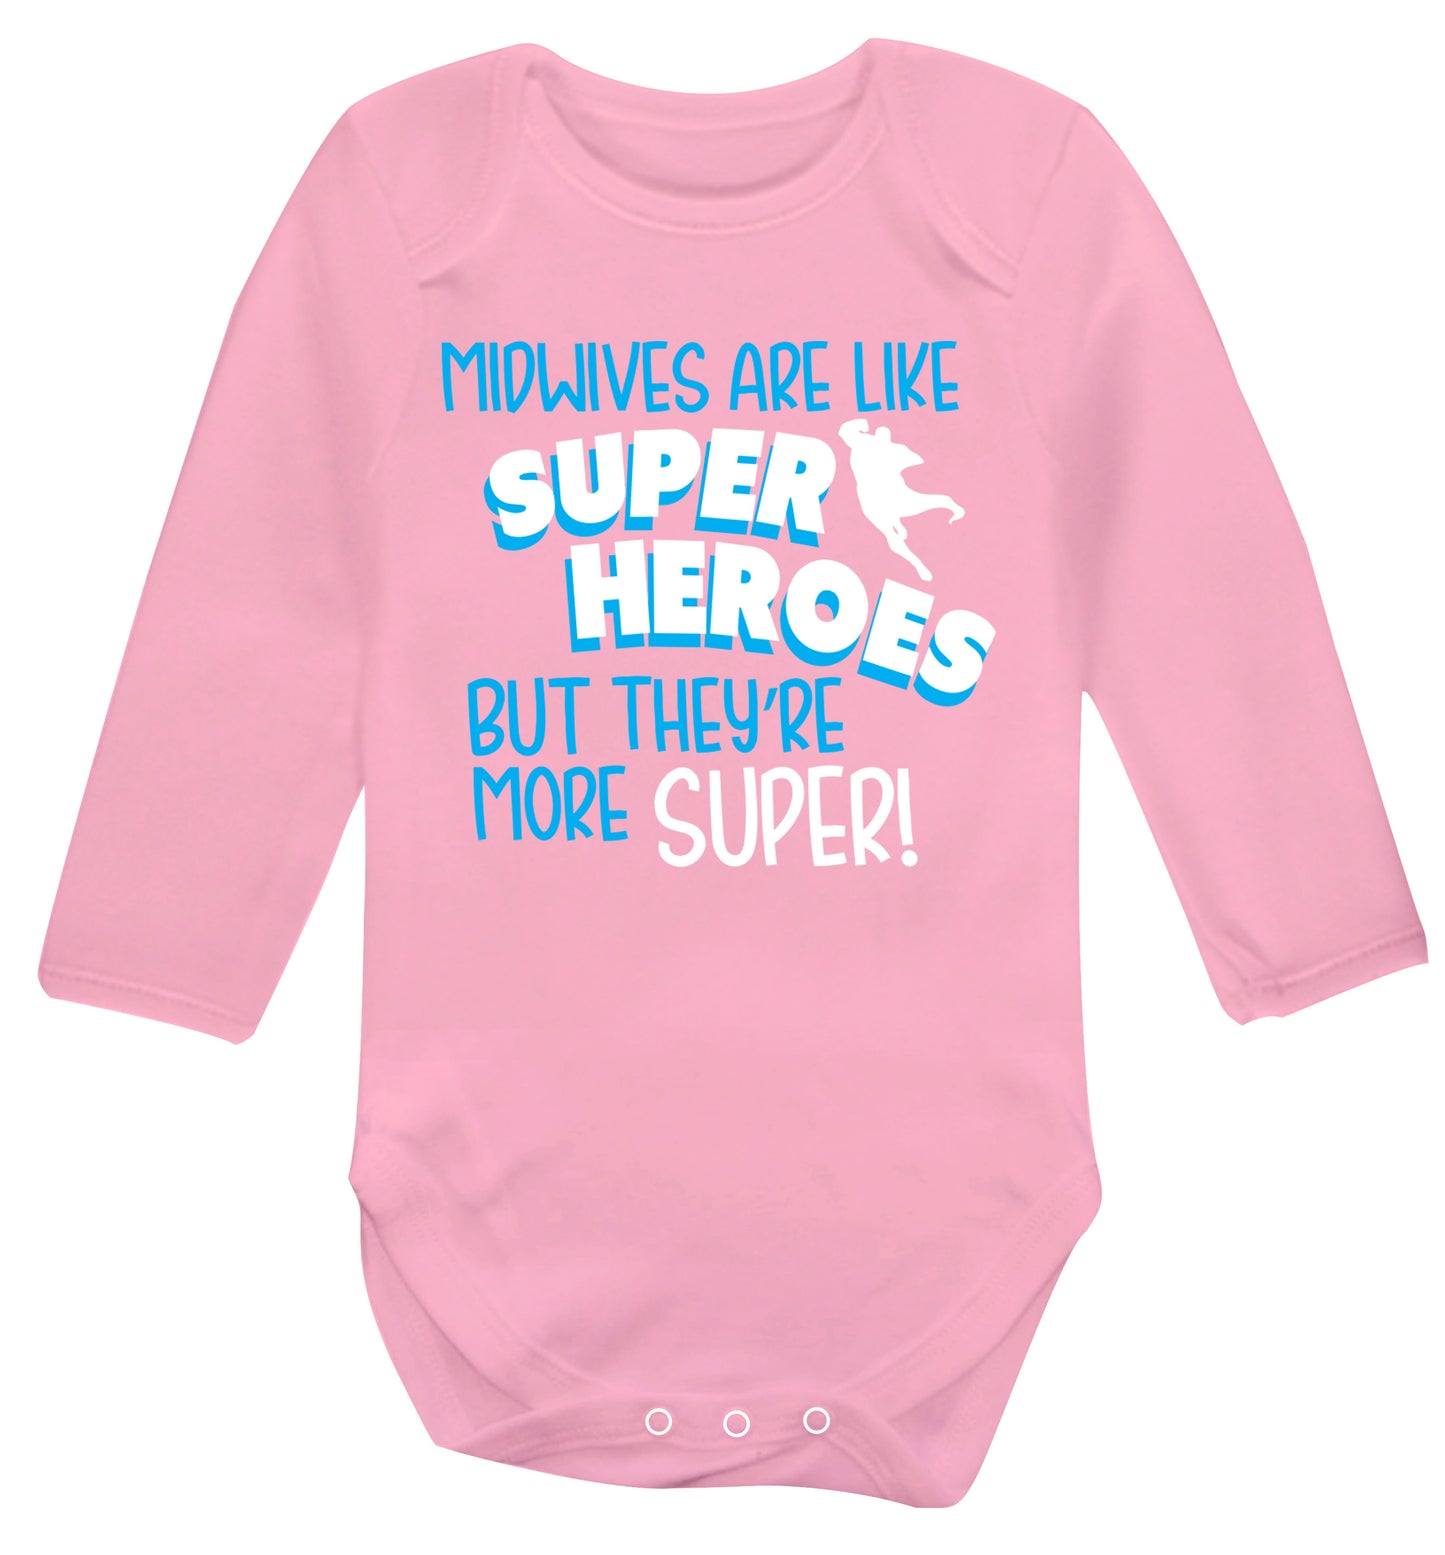 Midwives are like superheros but they're more super Baby Vest long sleeved pale pink 6-12 months